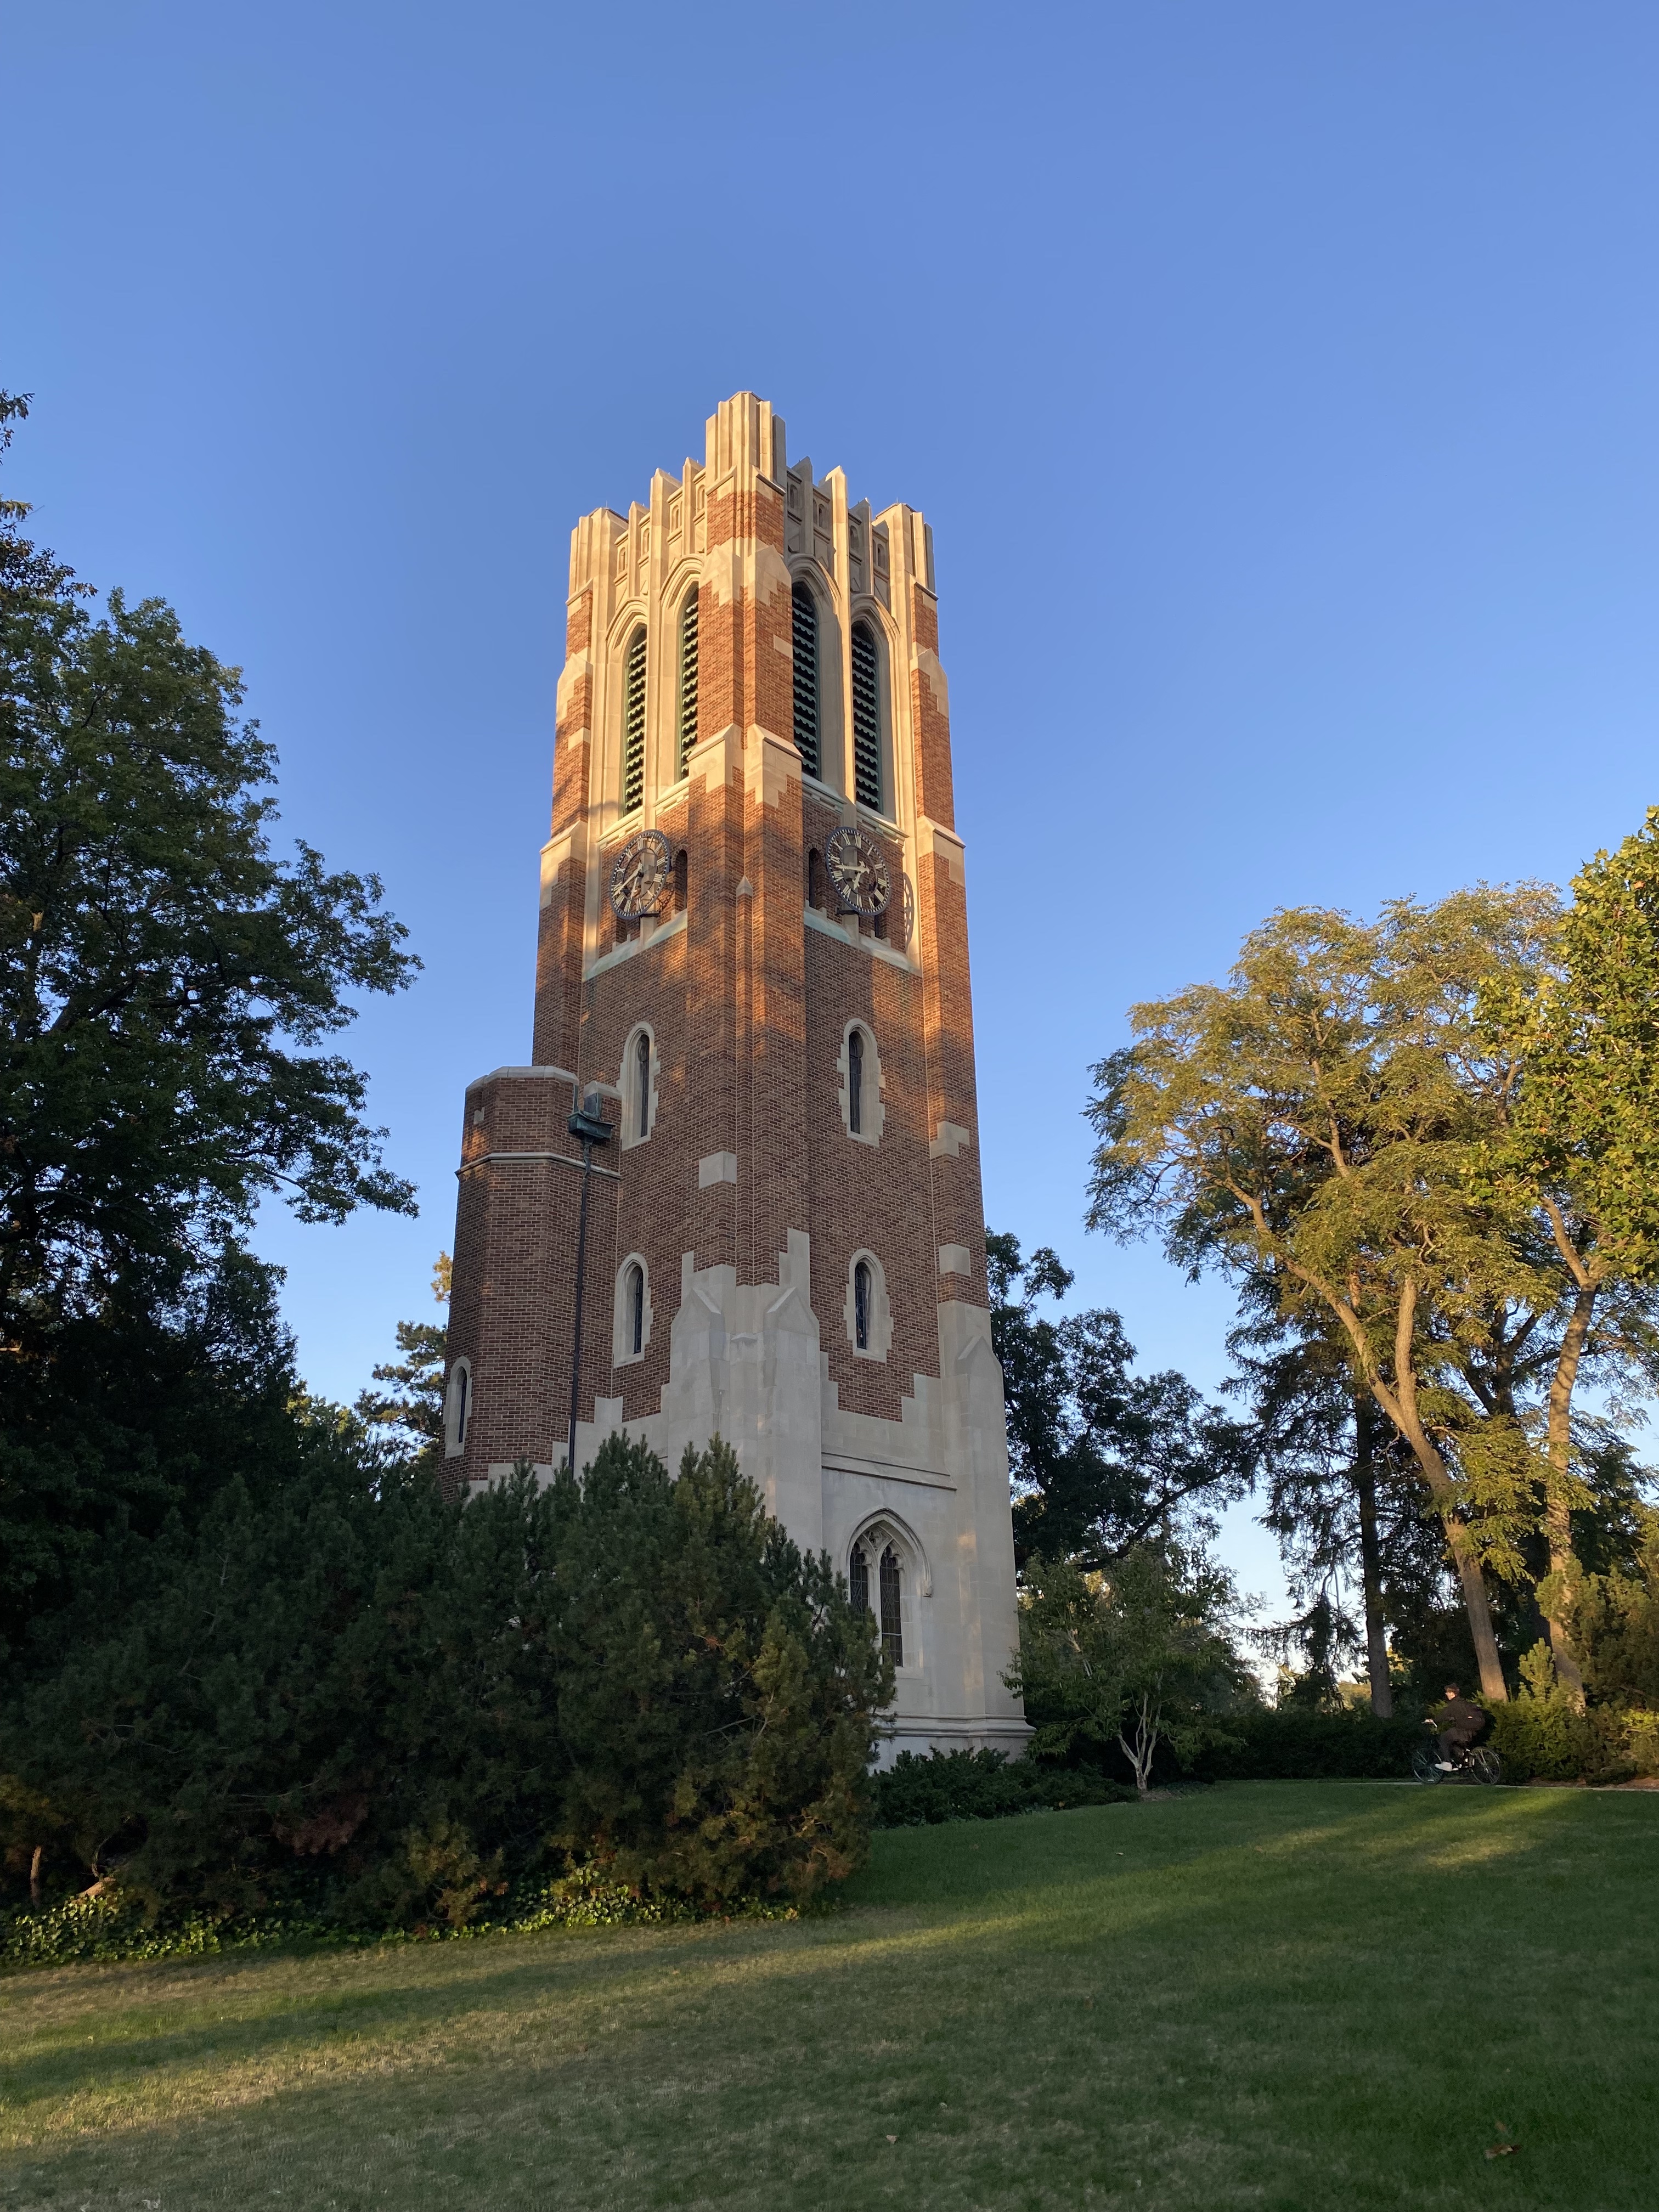 Image shows Beaumont Tower in the sunlight